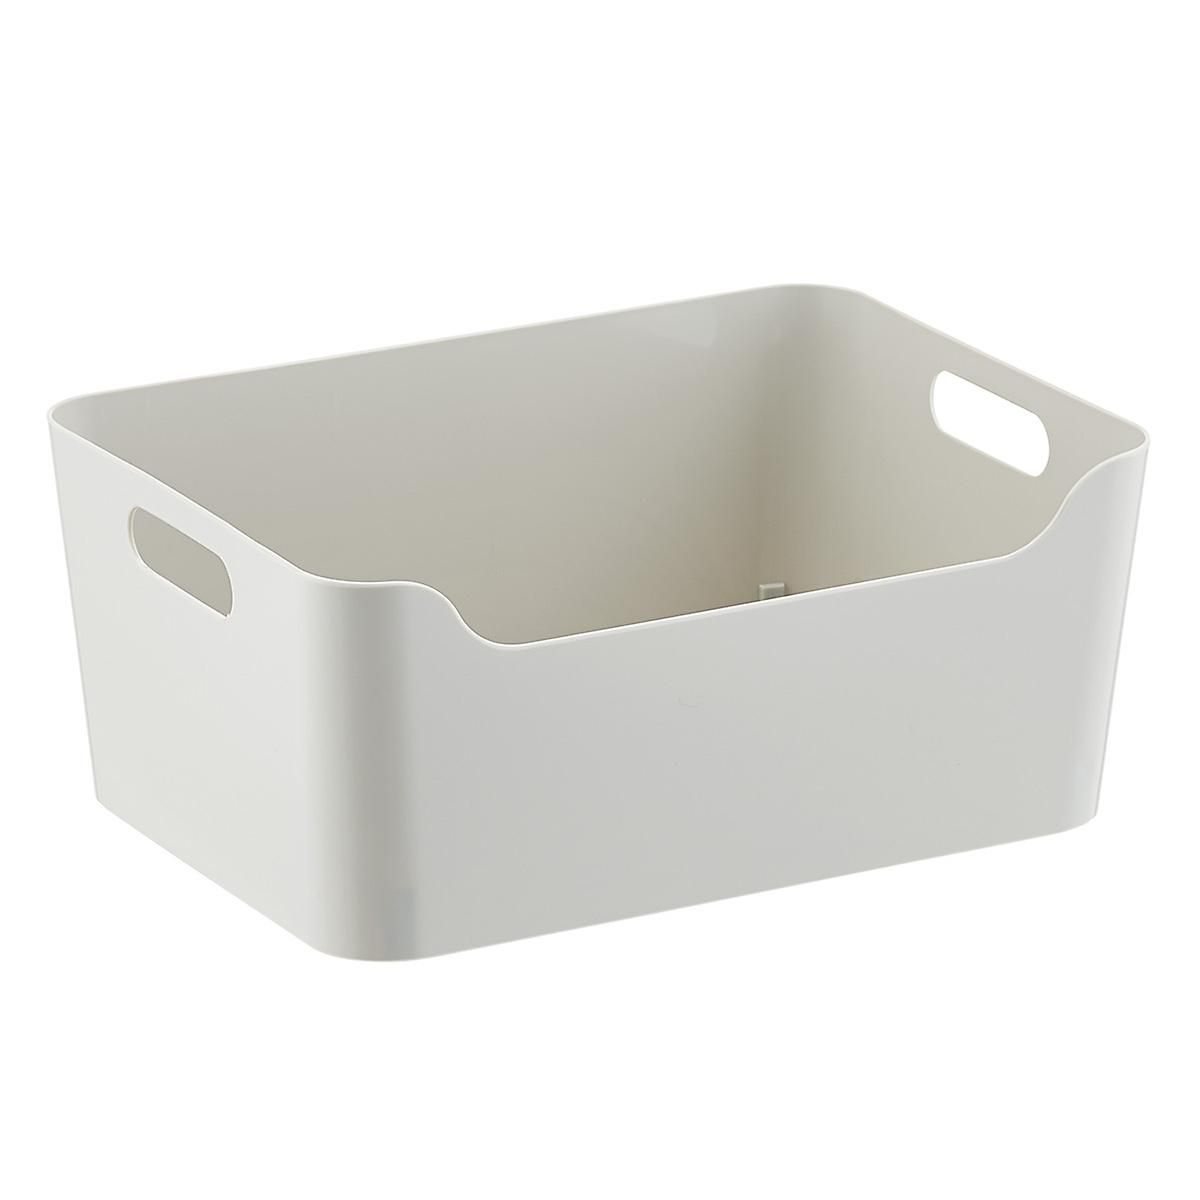 Light Grey Plastic Storage Bins with Handles | The Container Store